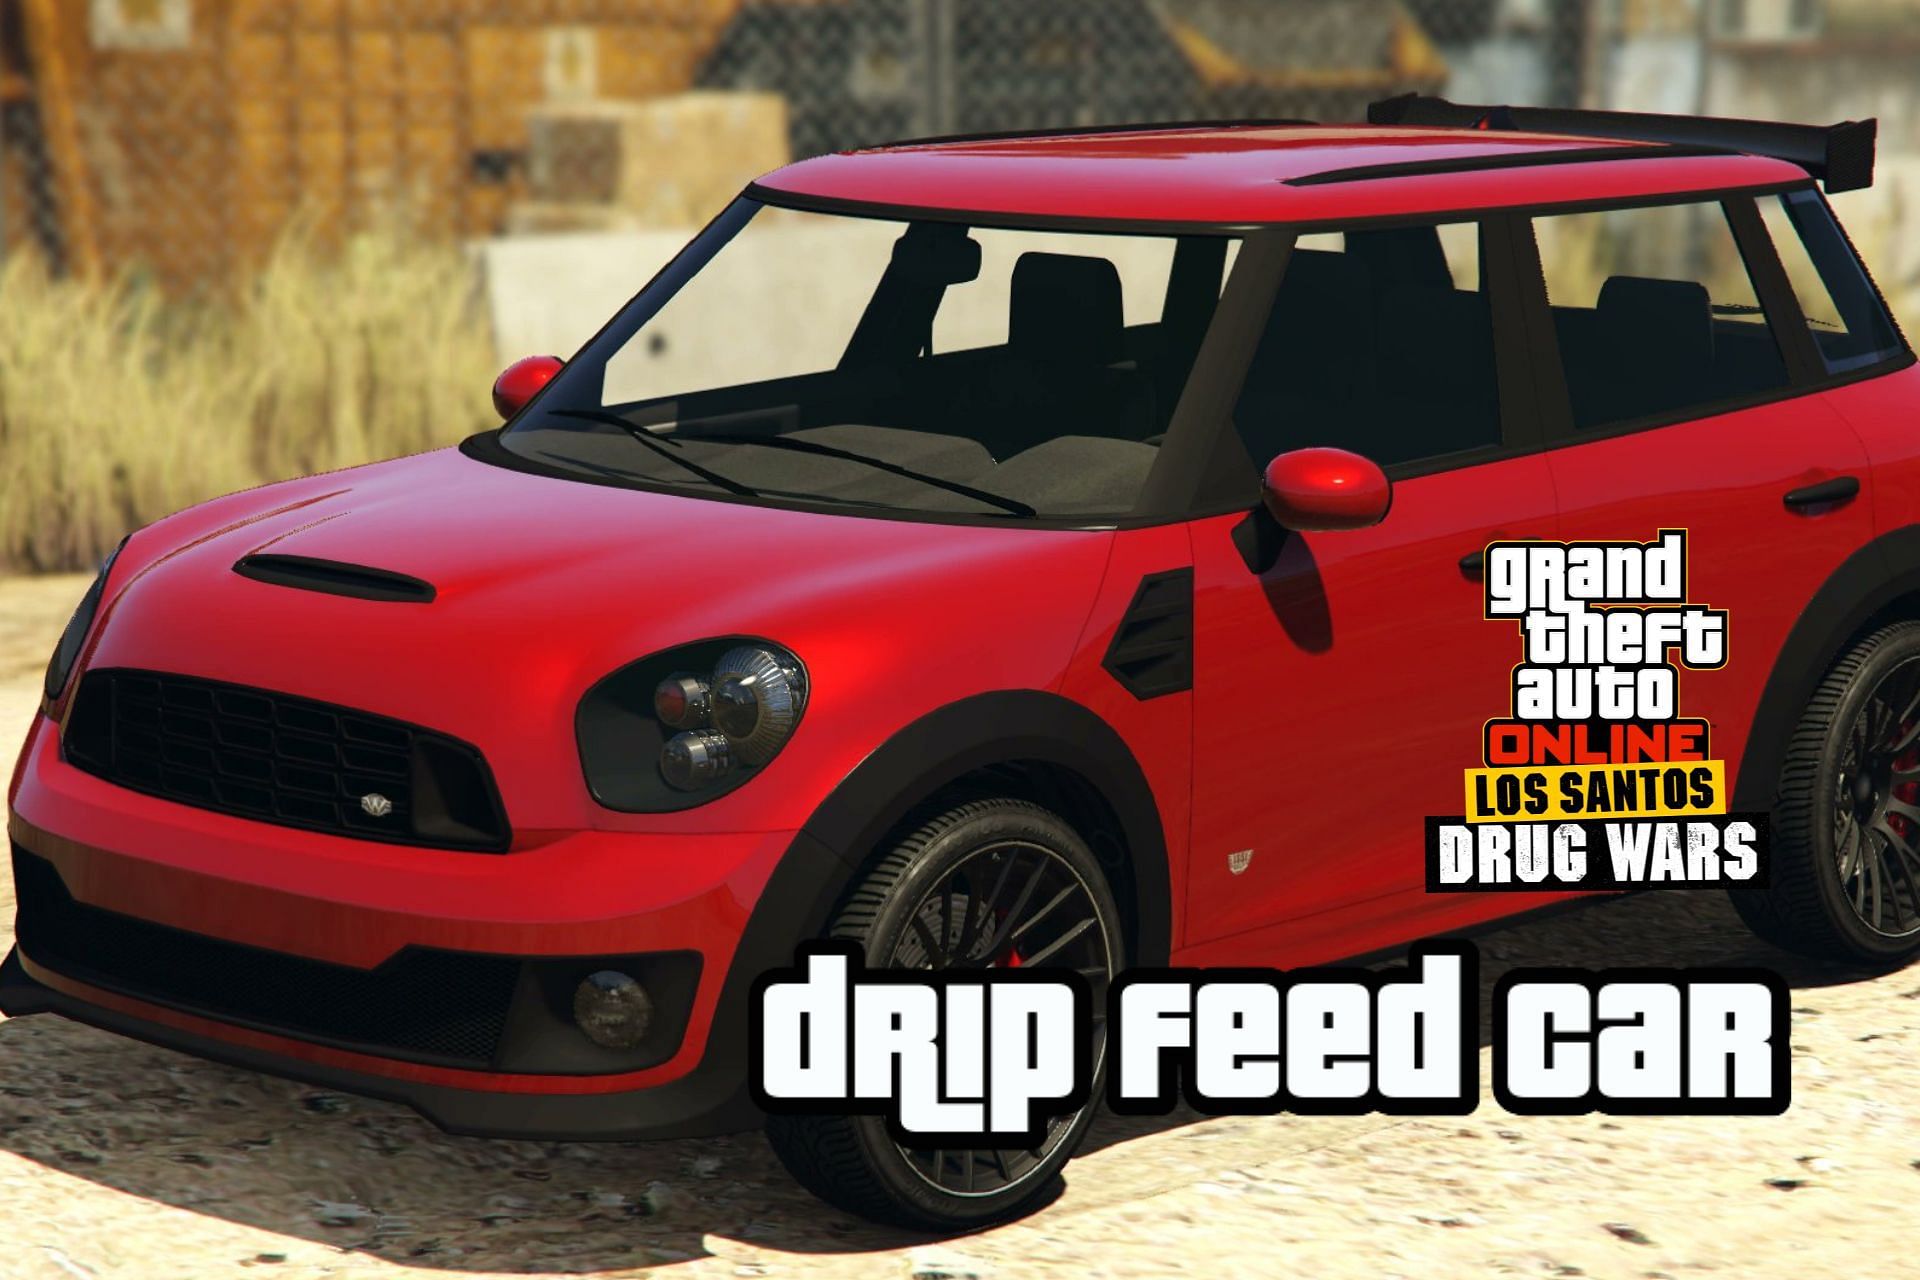 Issi Rally is the latest drip feed car added to the GTA Online Los Santos Drug Wars update (Image via Twitter/Tez2)